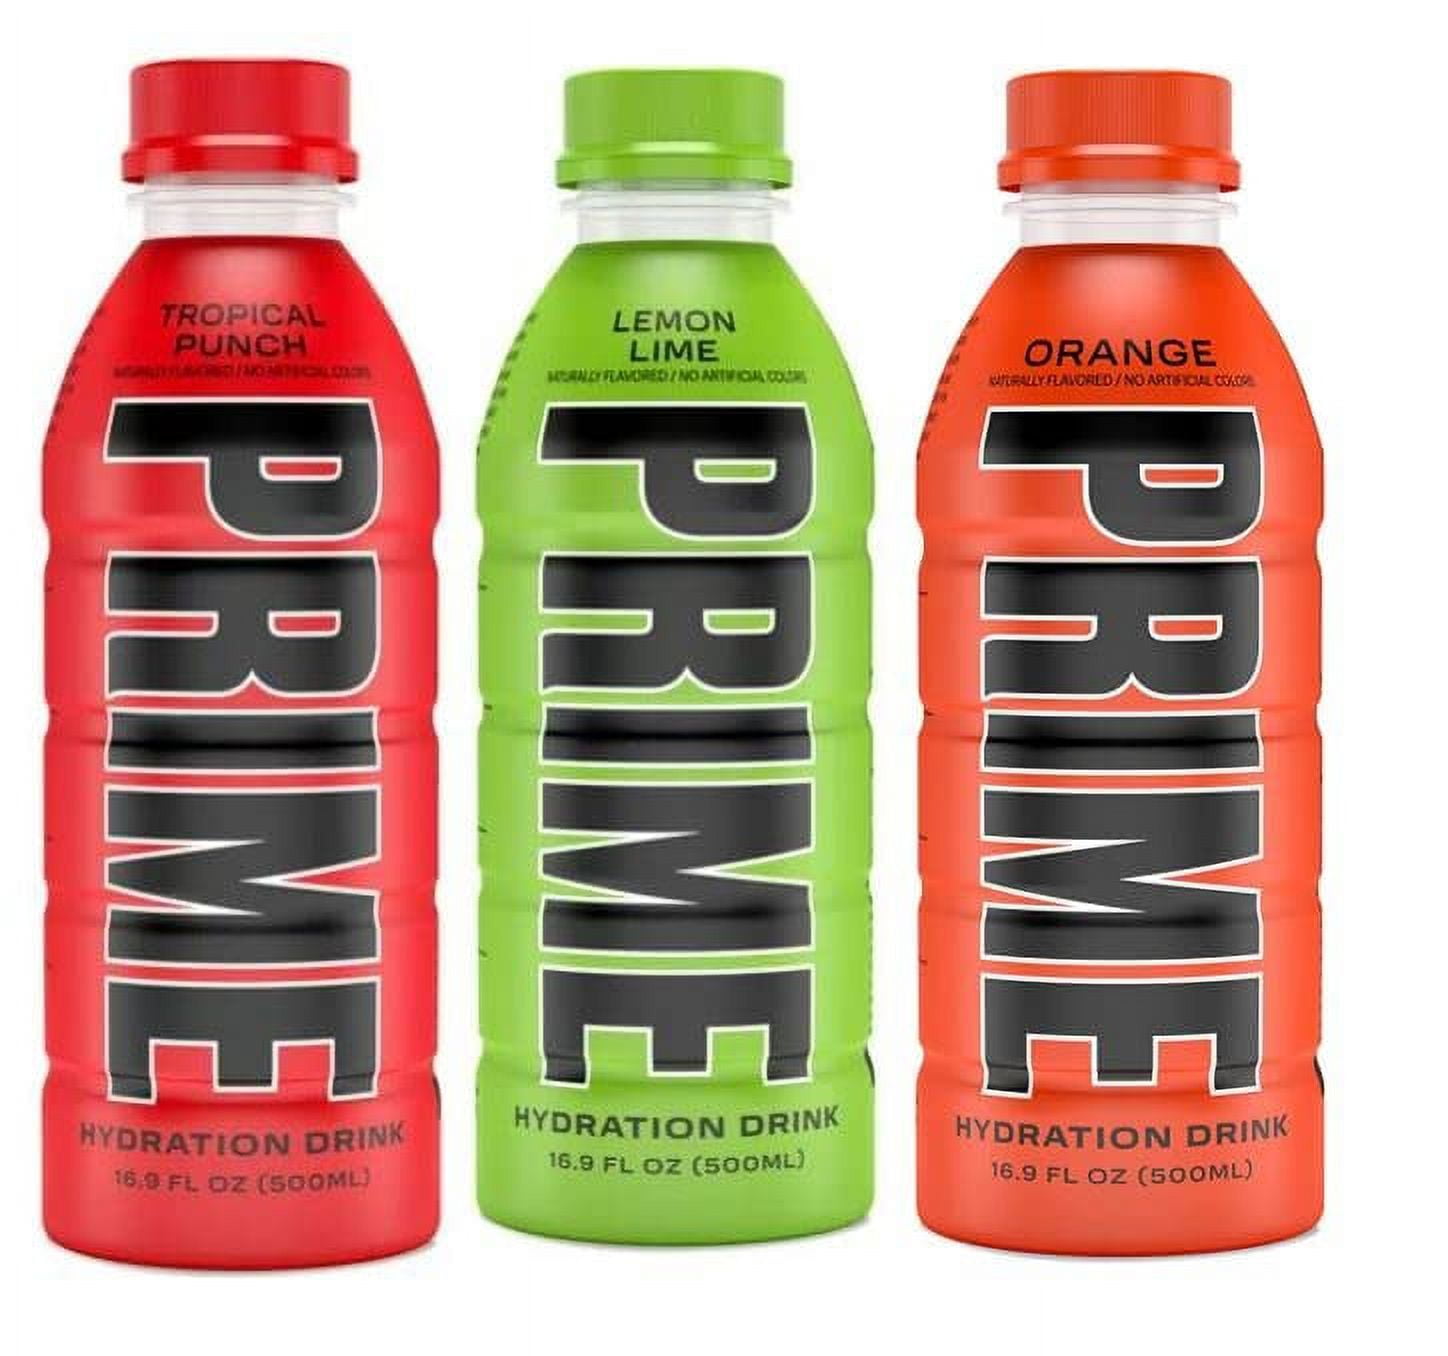 USA IMPORT Prime Hydration Drink Bottles - Made in Louisville, KENTUCKY